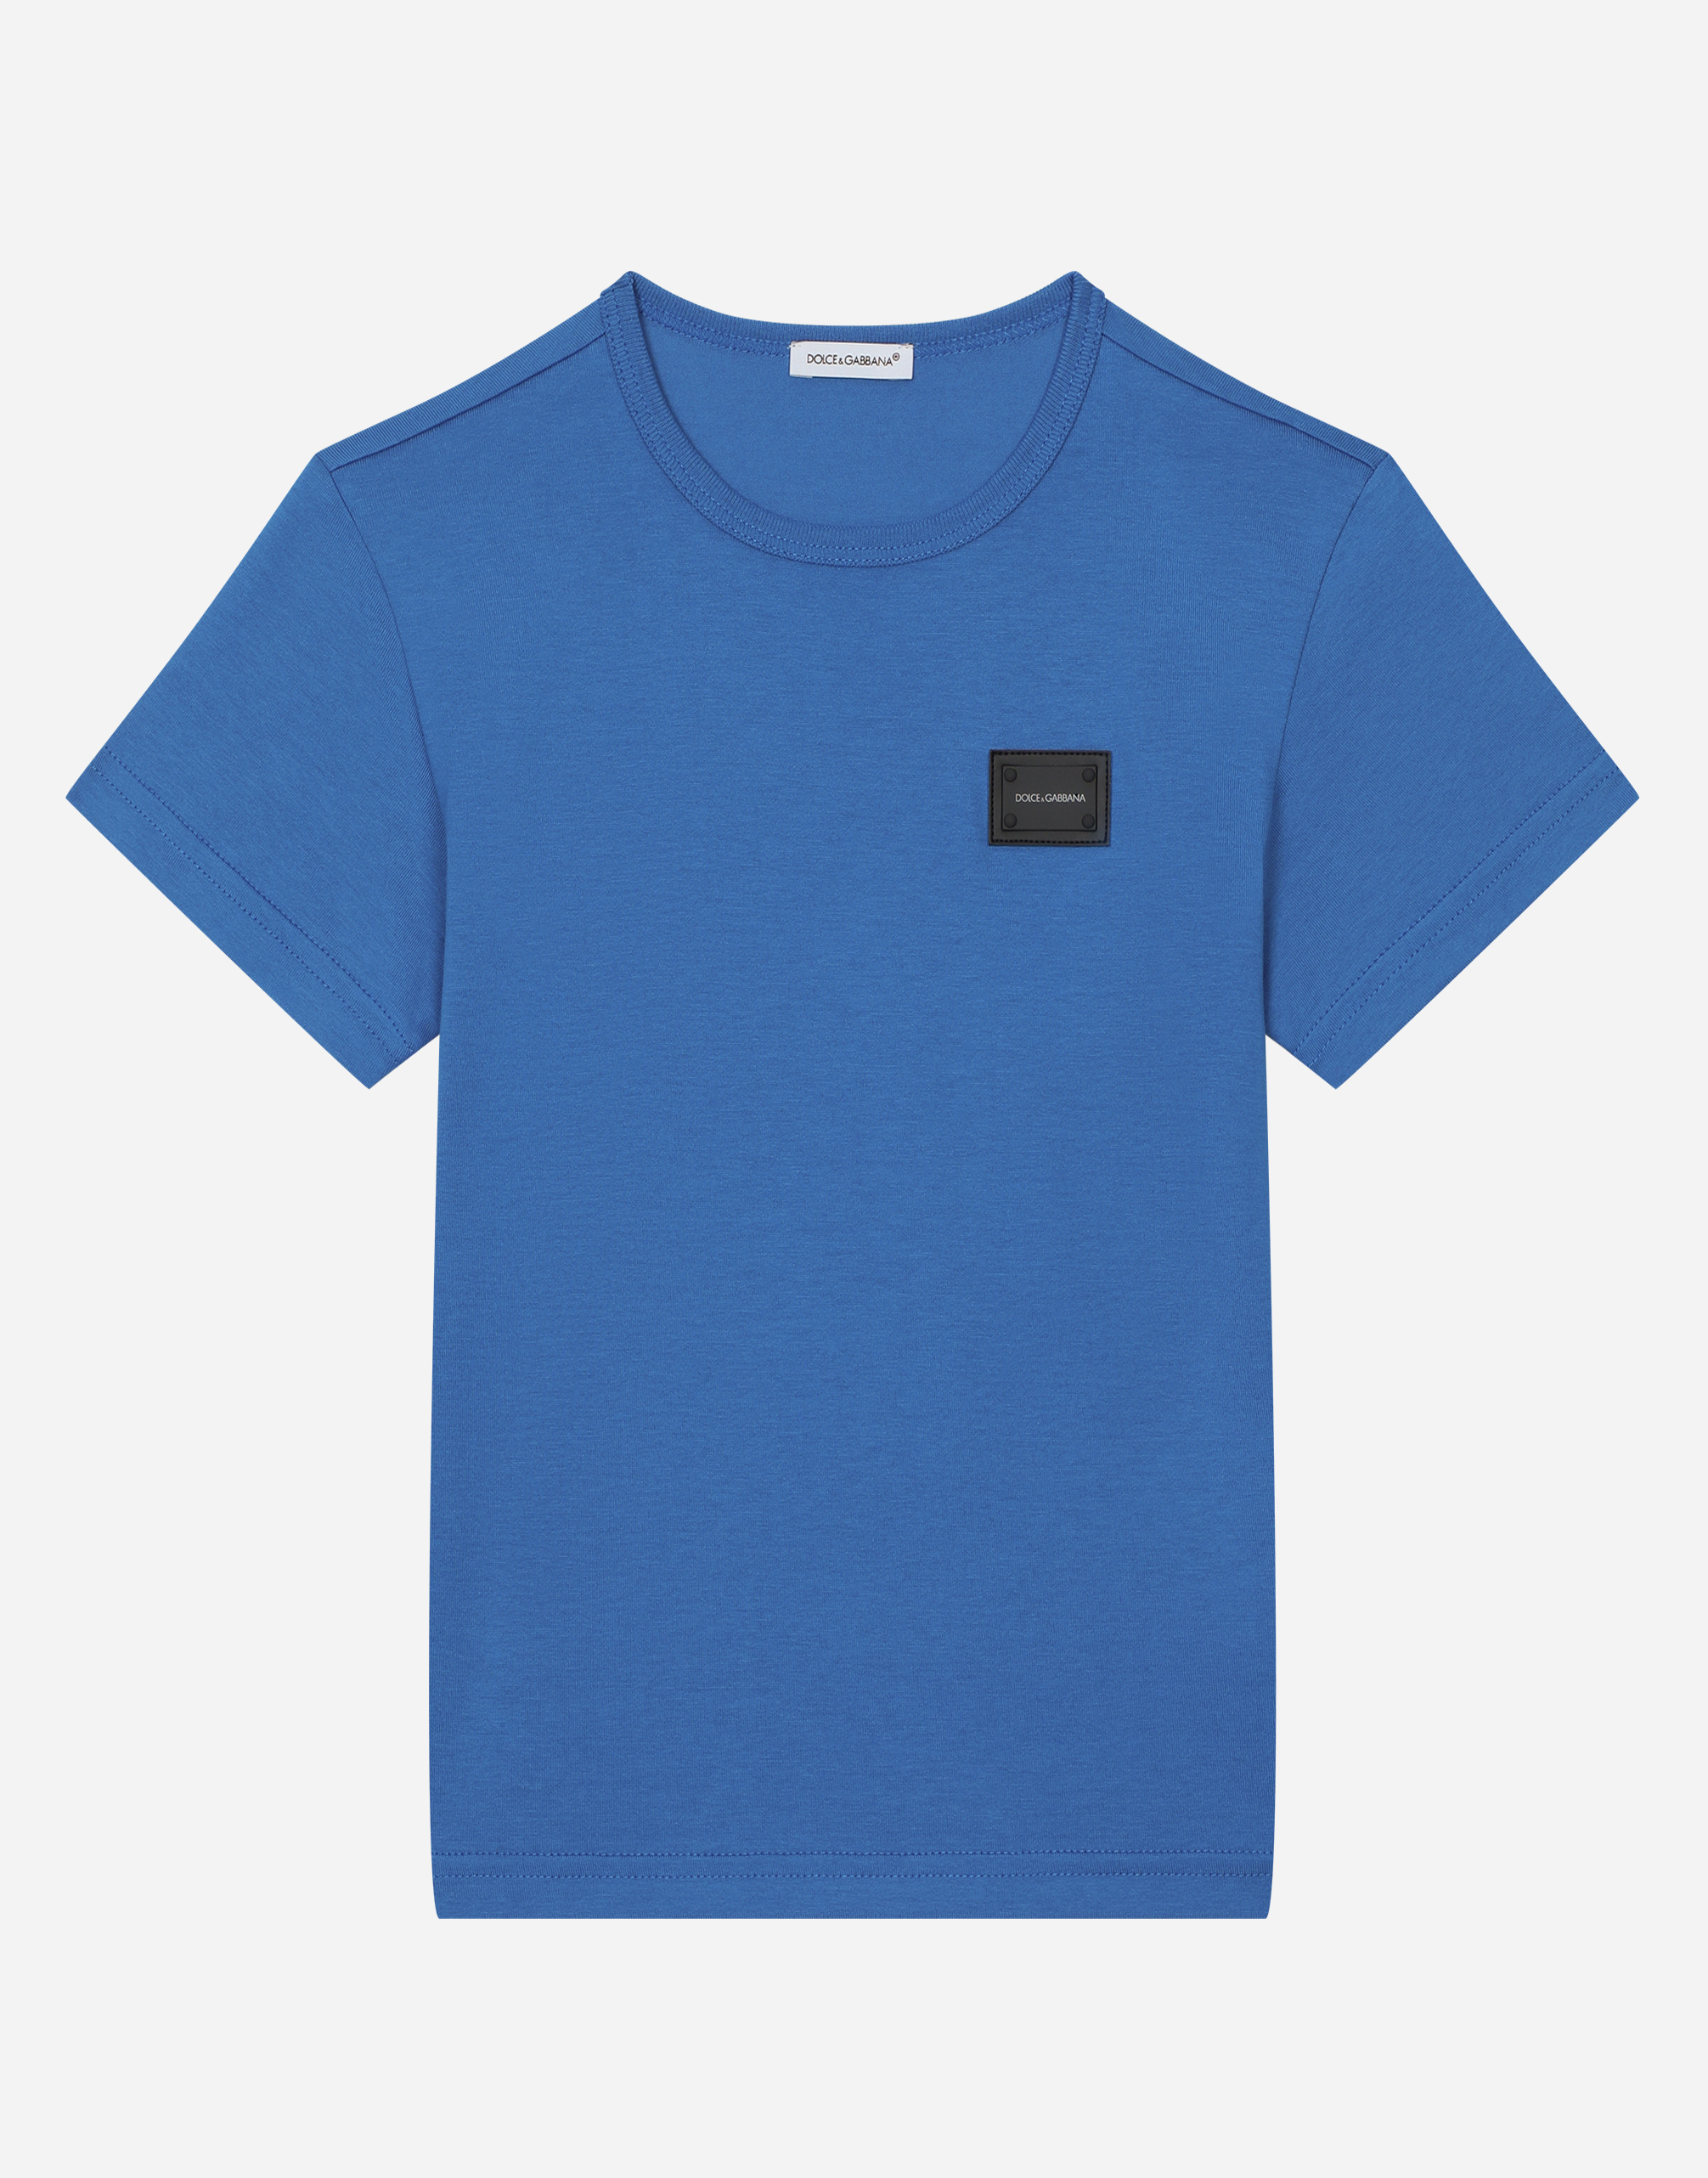 Jersey T-shirt with logo tag in Turquoise